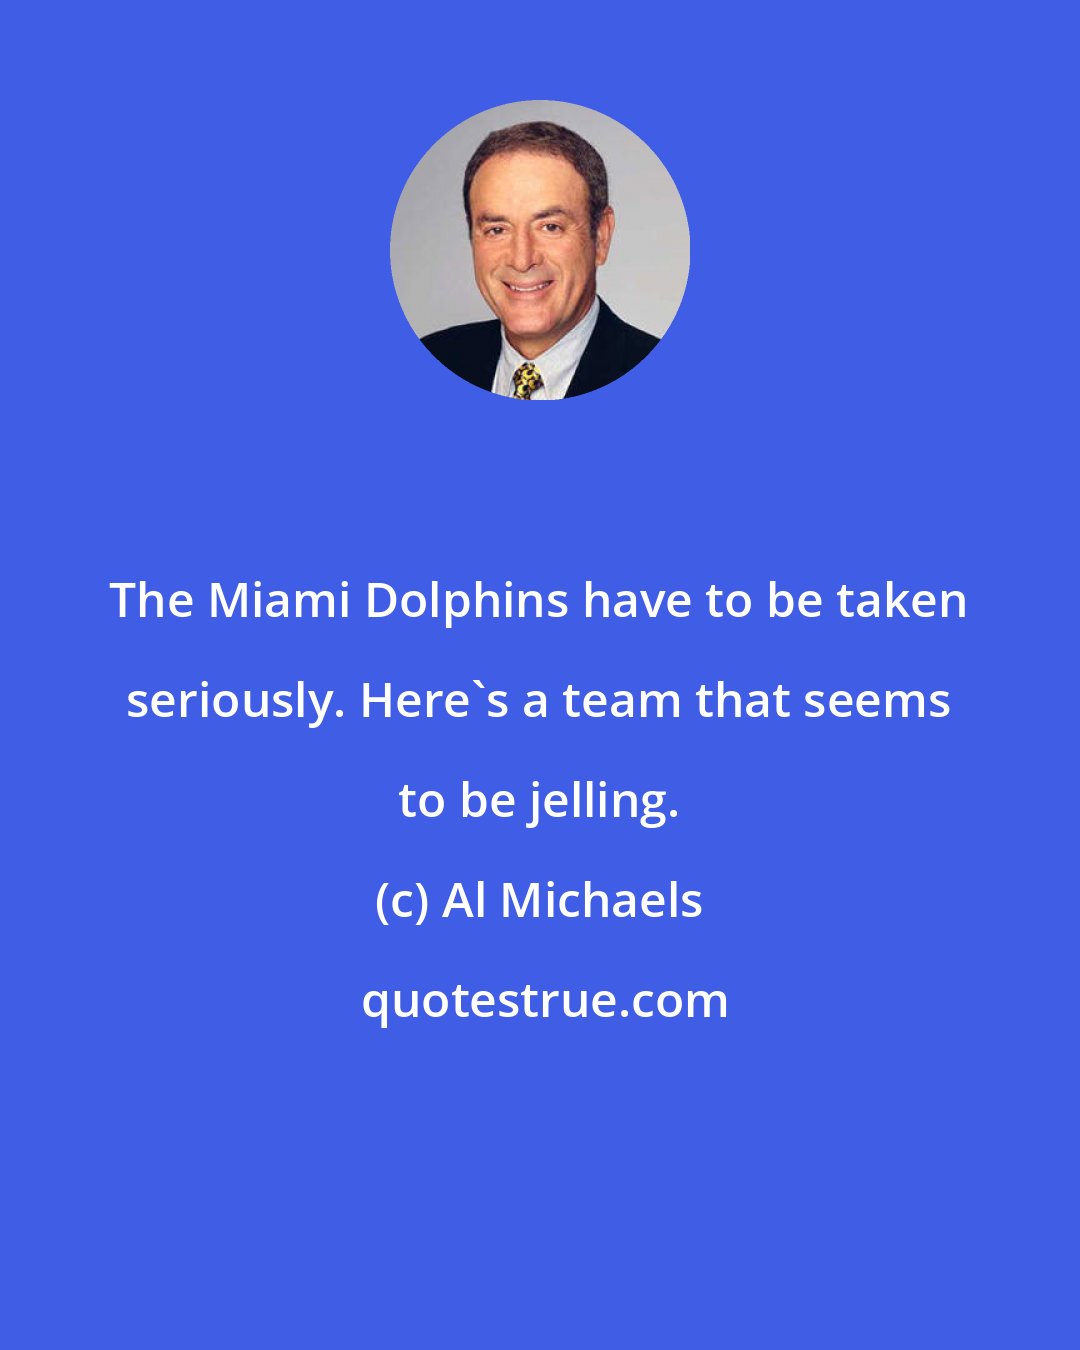 Al Michaels: The Miami Dolphins have to be taken seriously. Here's a team that seems to be jelling.